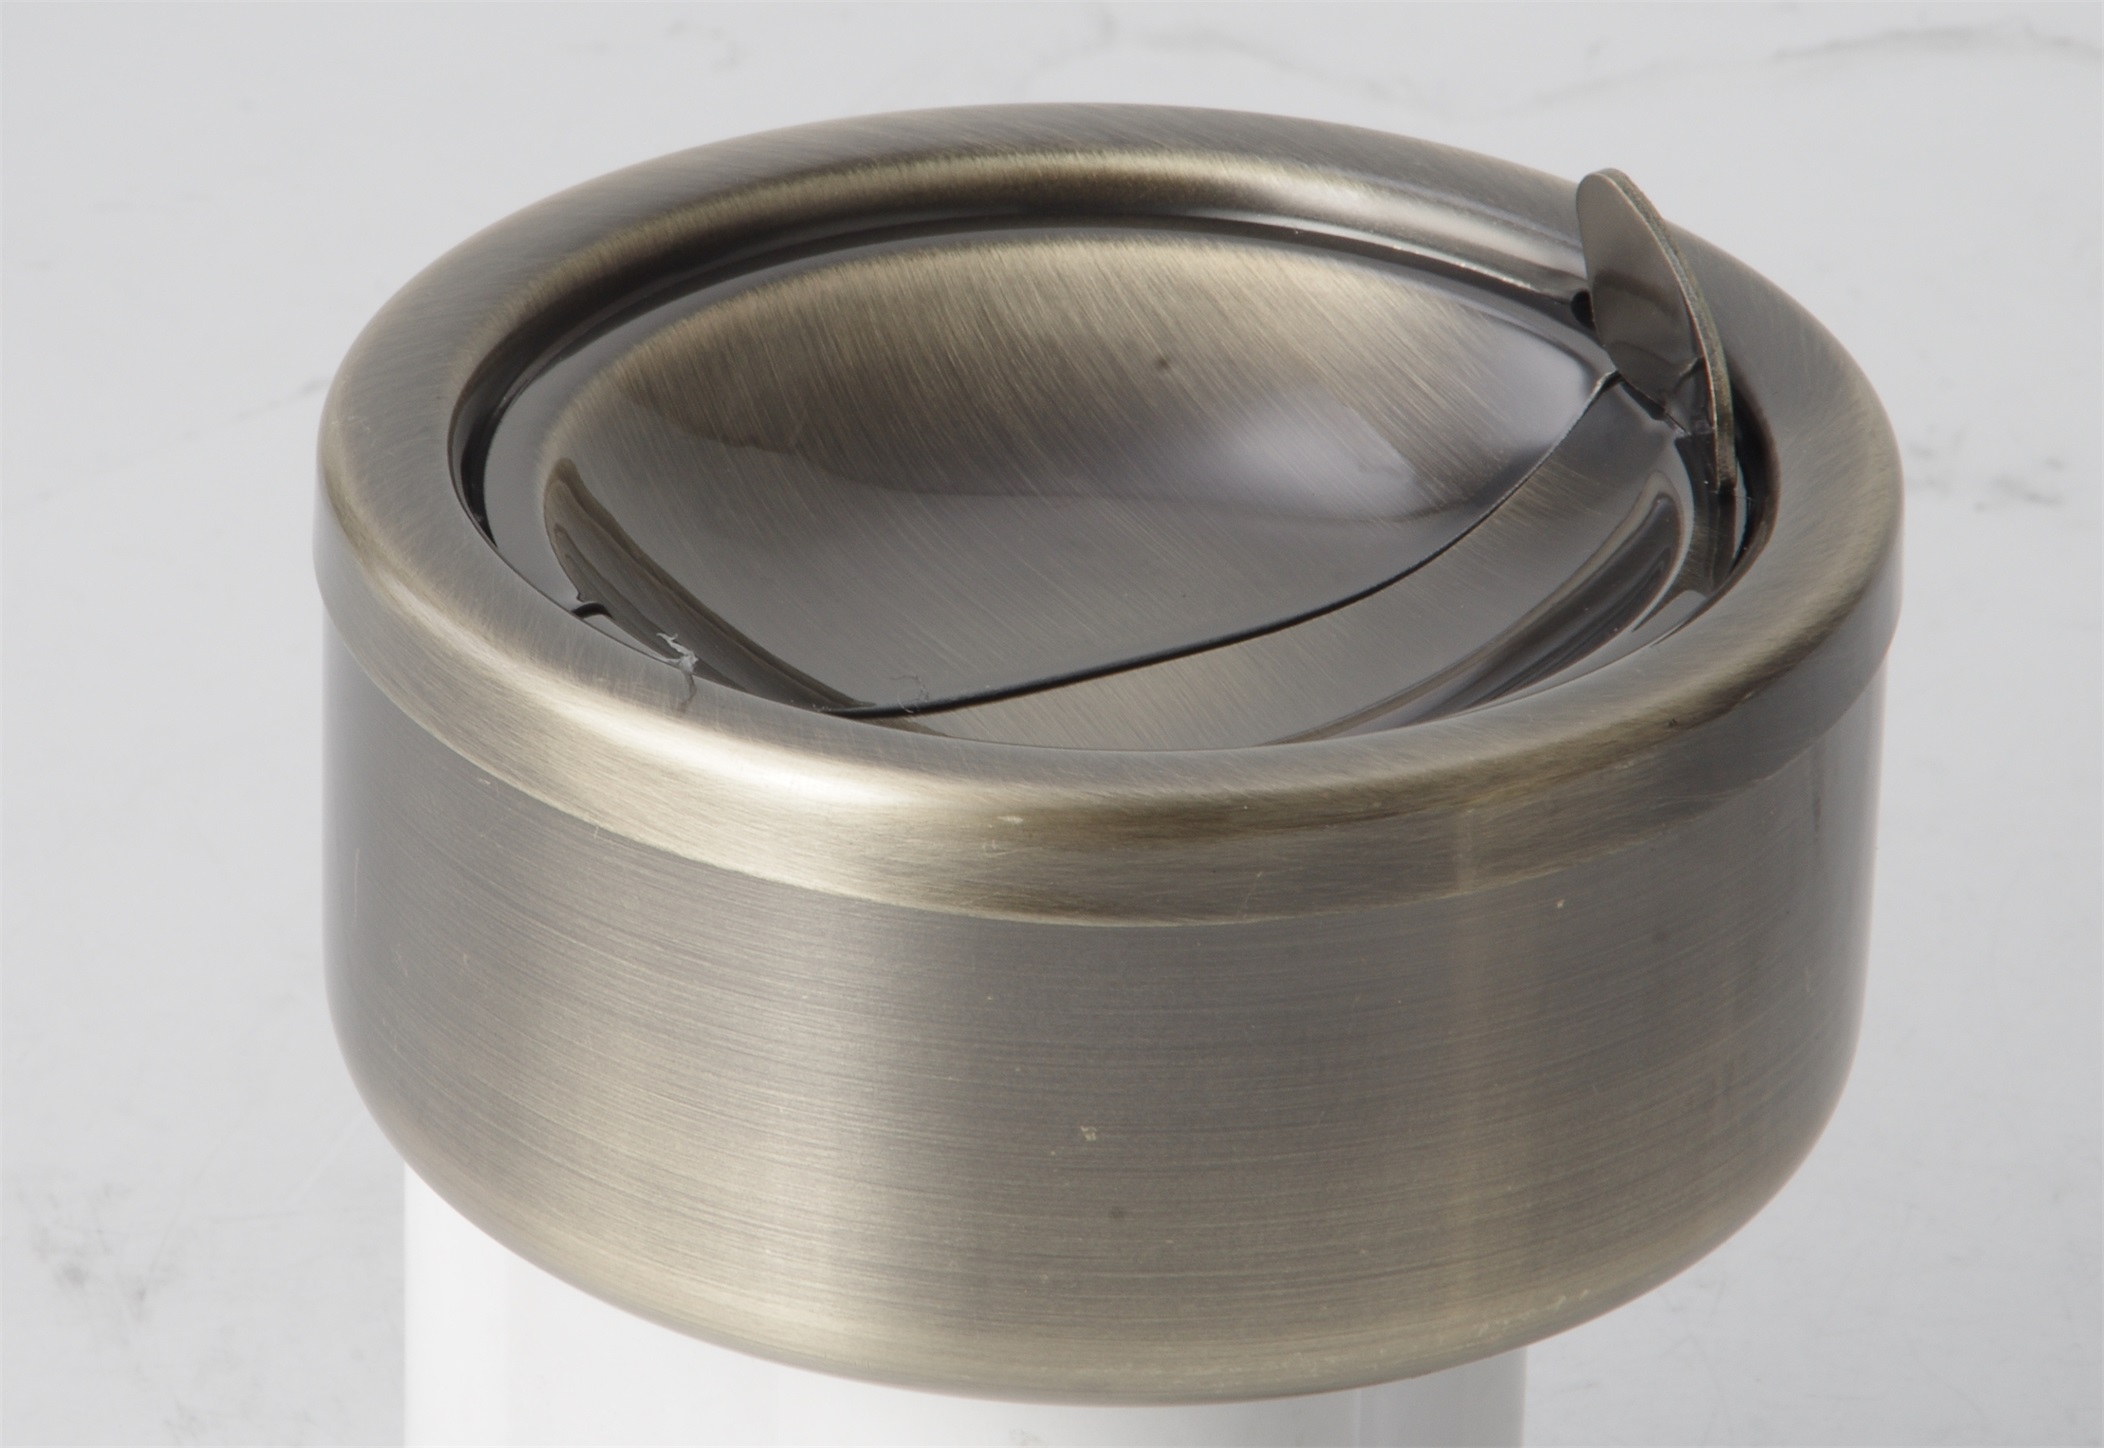 Evergreen stainless ashtray manufacturers for cooking